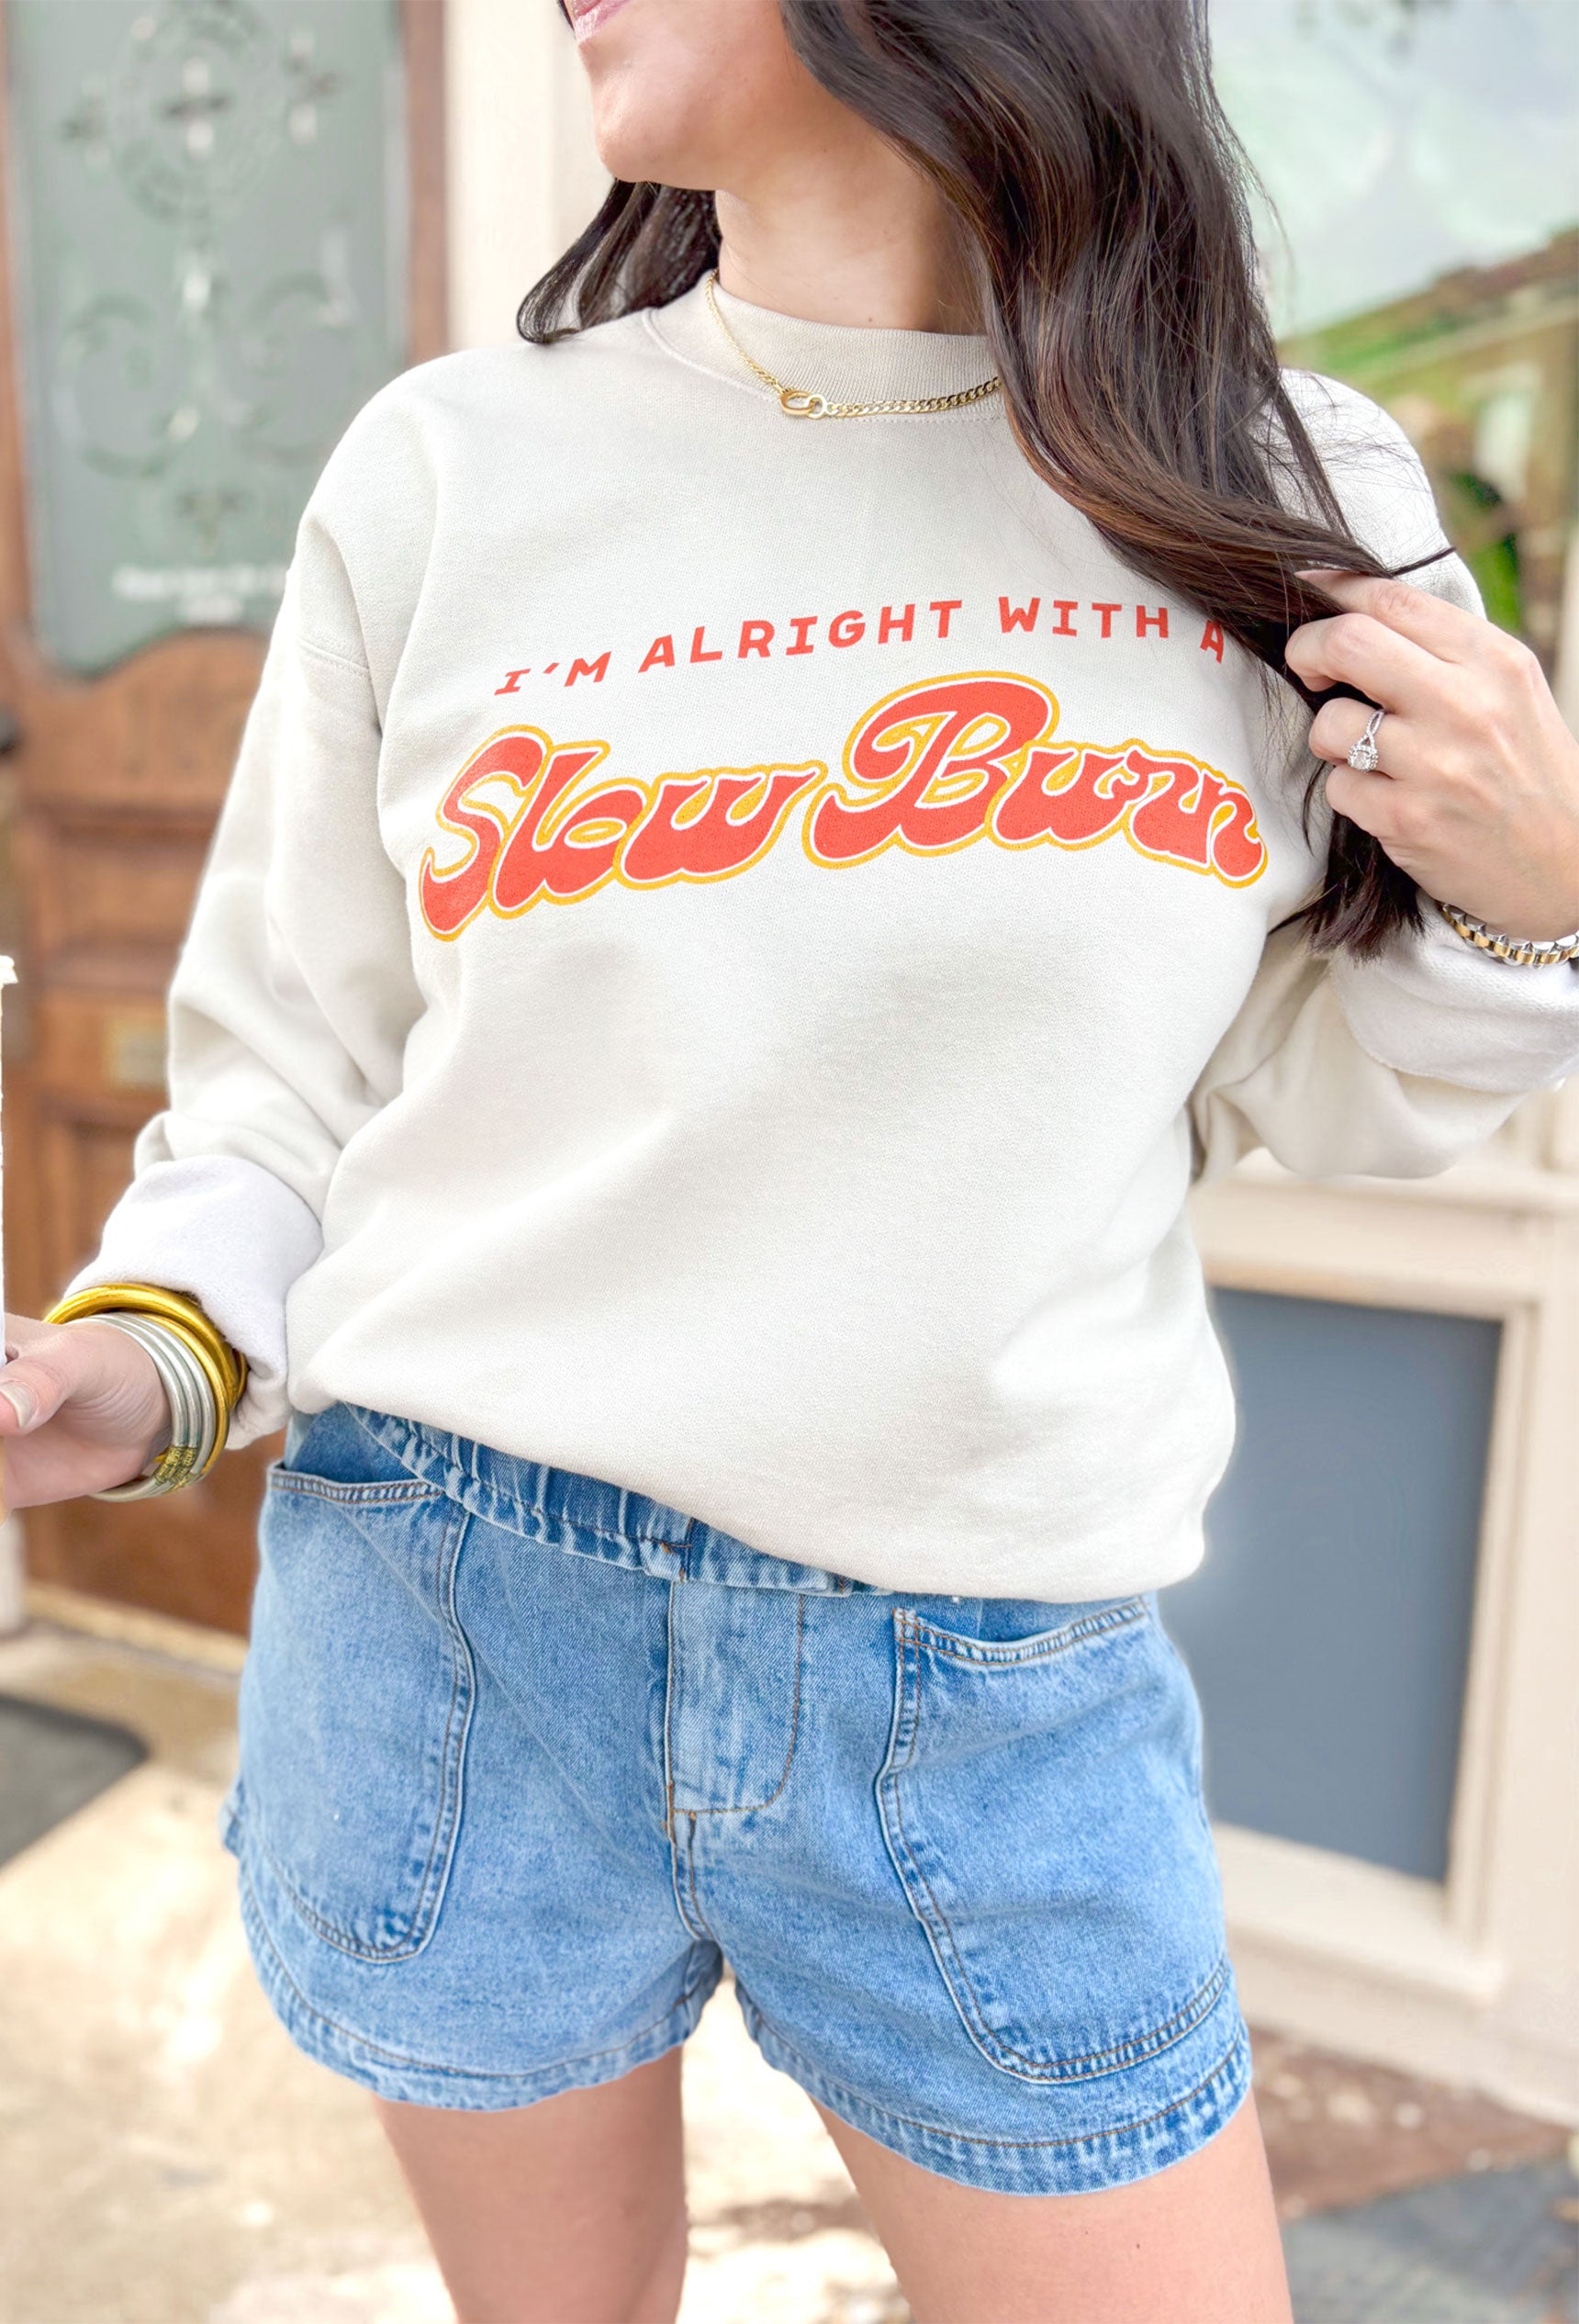 Charlie Southern: Slow Burn Sweatshirt, tan crewneck with front graphic in red and yellow saying "i'm alright with a slow burn" on the back is different match boxes in the colors red, pink, yellow, orange, and white